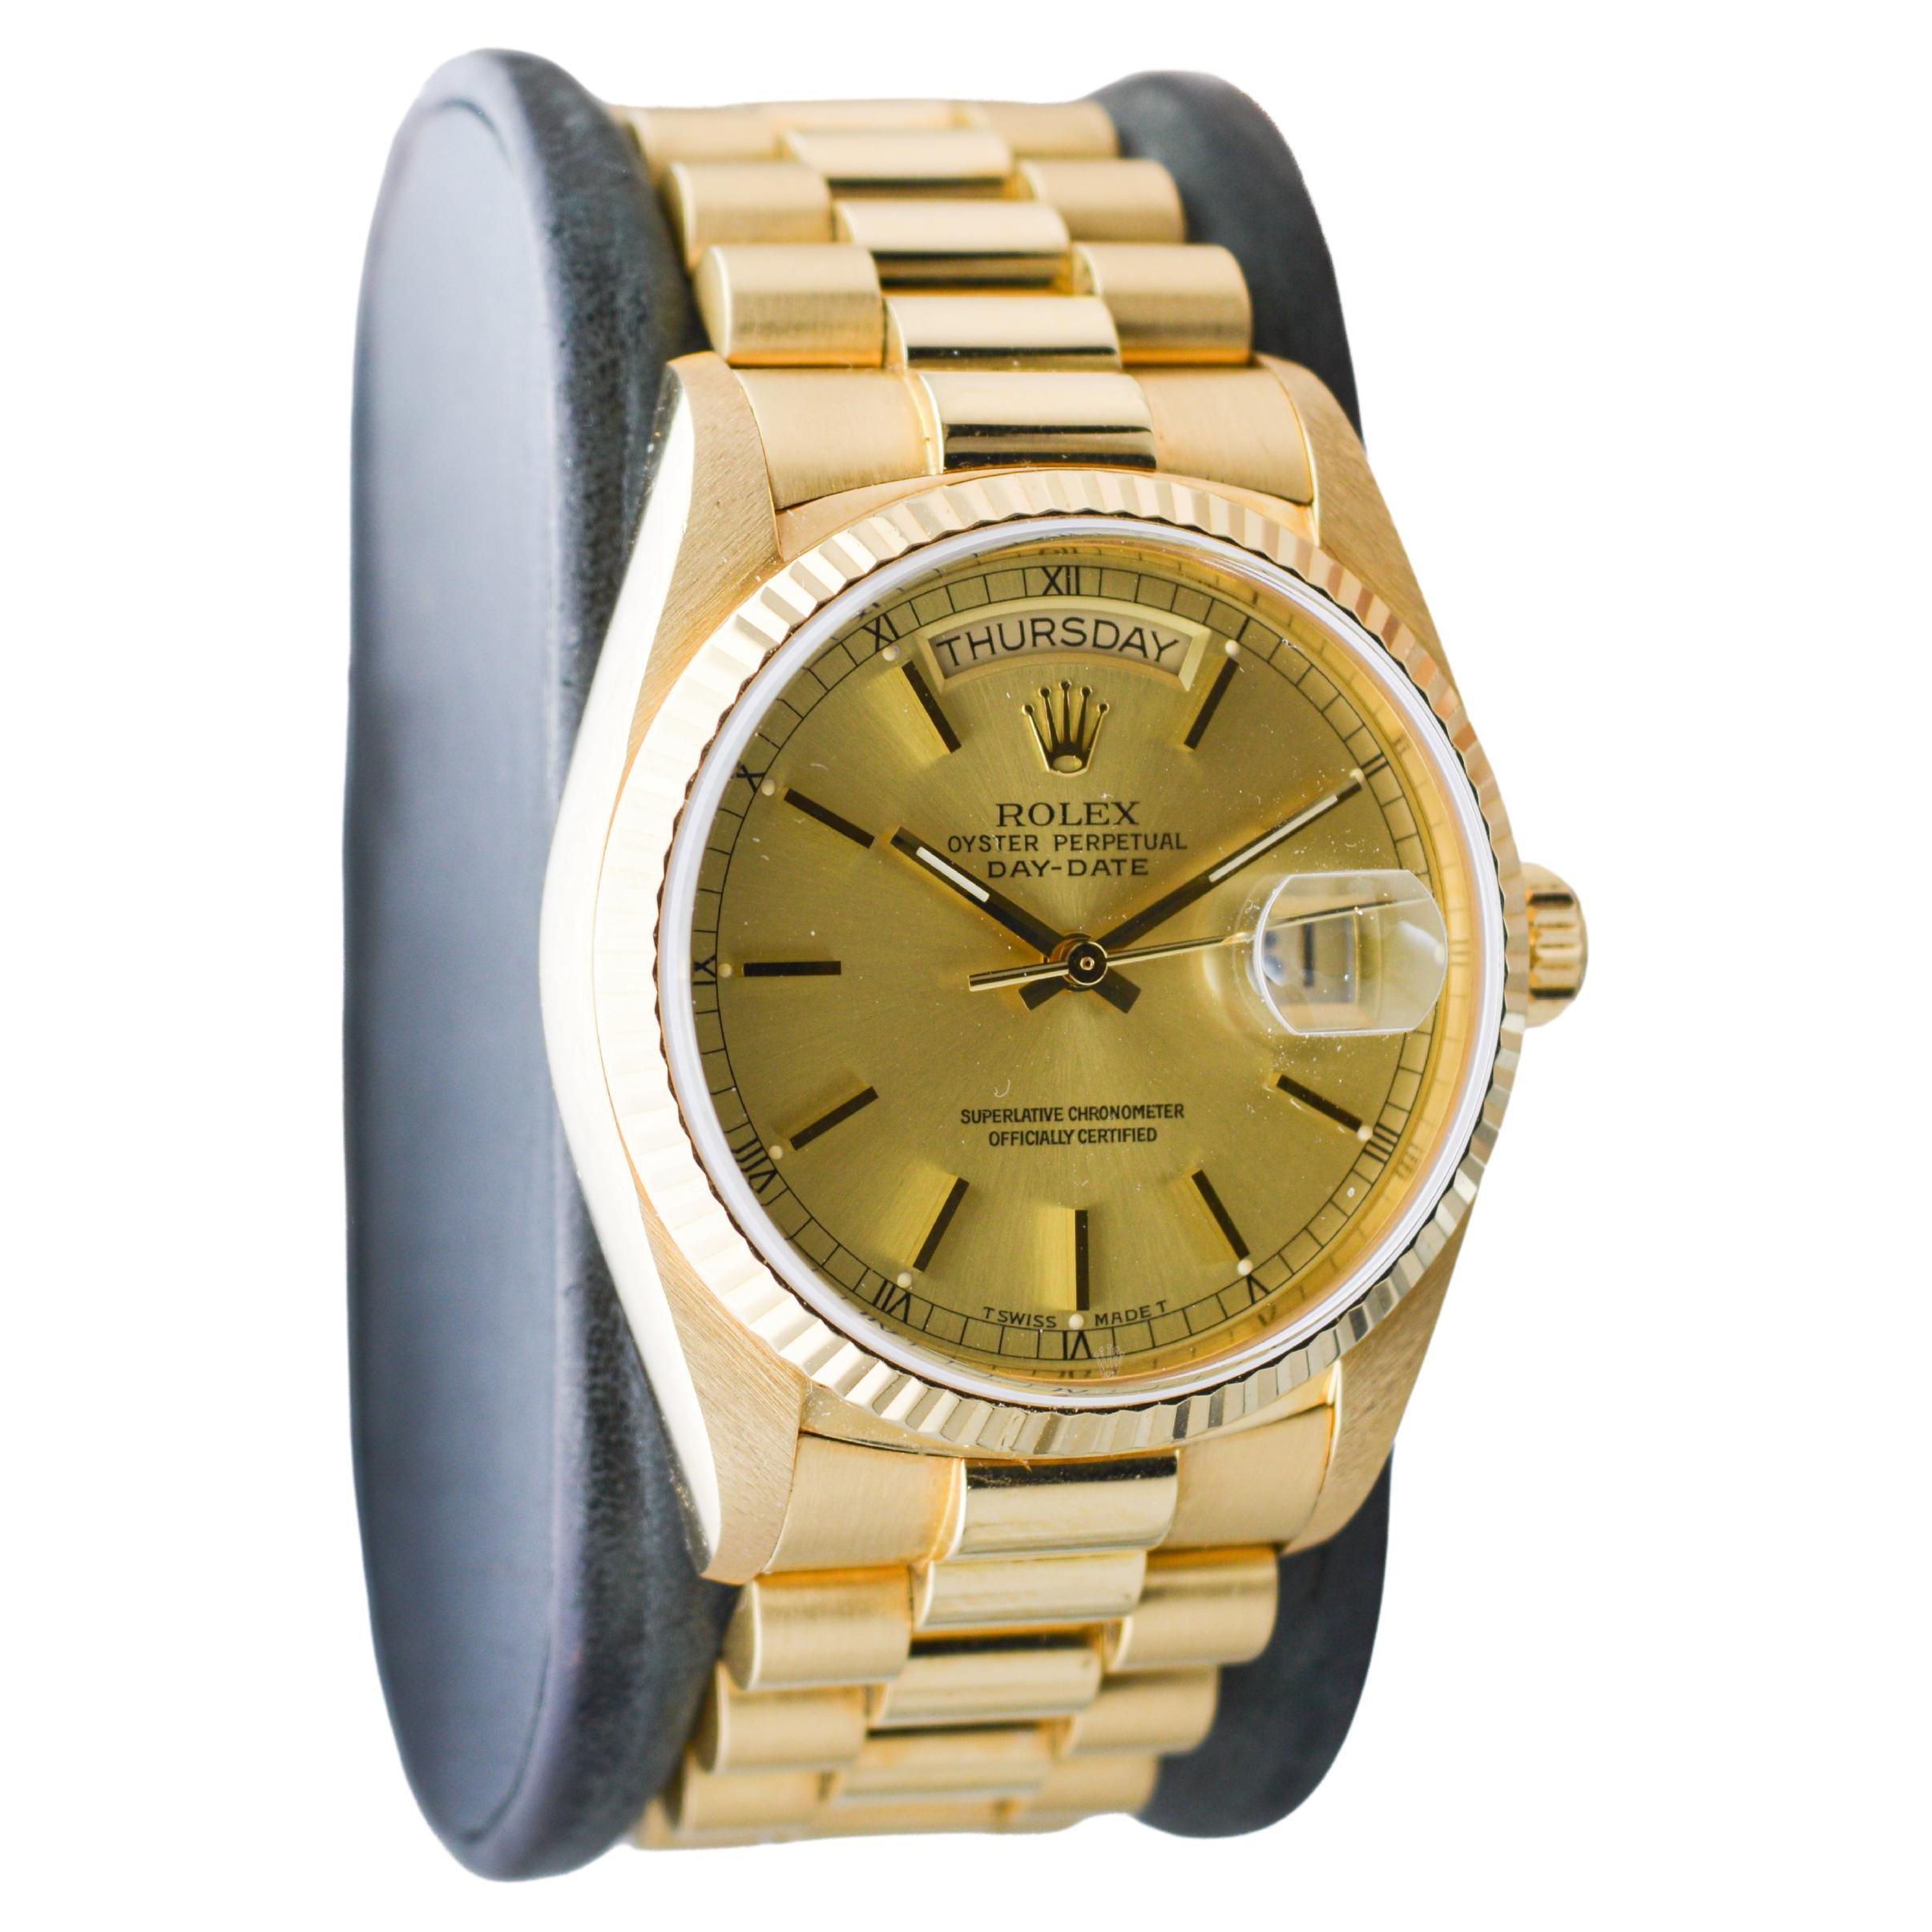 FACTORY / HOUSE: Rolex Watch Company
STYLE / REFERENCE: President / Reference 18000
METAL / MATERIAL: 18Kt. Yellow Gold
CIRCA / YEAR: 1980's
DIMENSIONS / SIZE: Length 44mm X Diameter 36mm
MOVEMENT / CALIBER: Perpetual Winding / 27 Jewels / Caliber